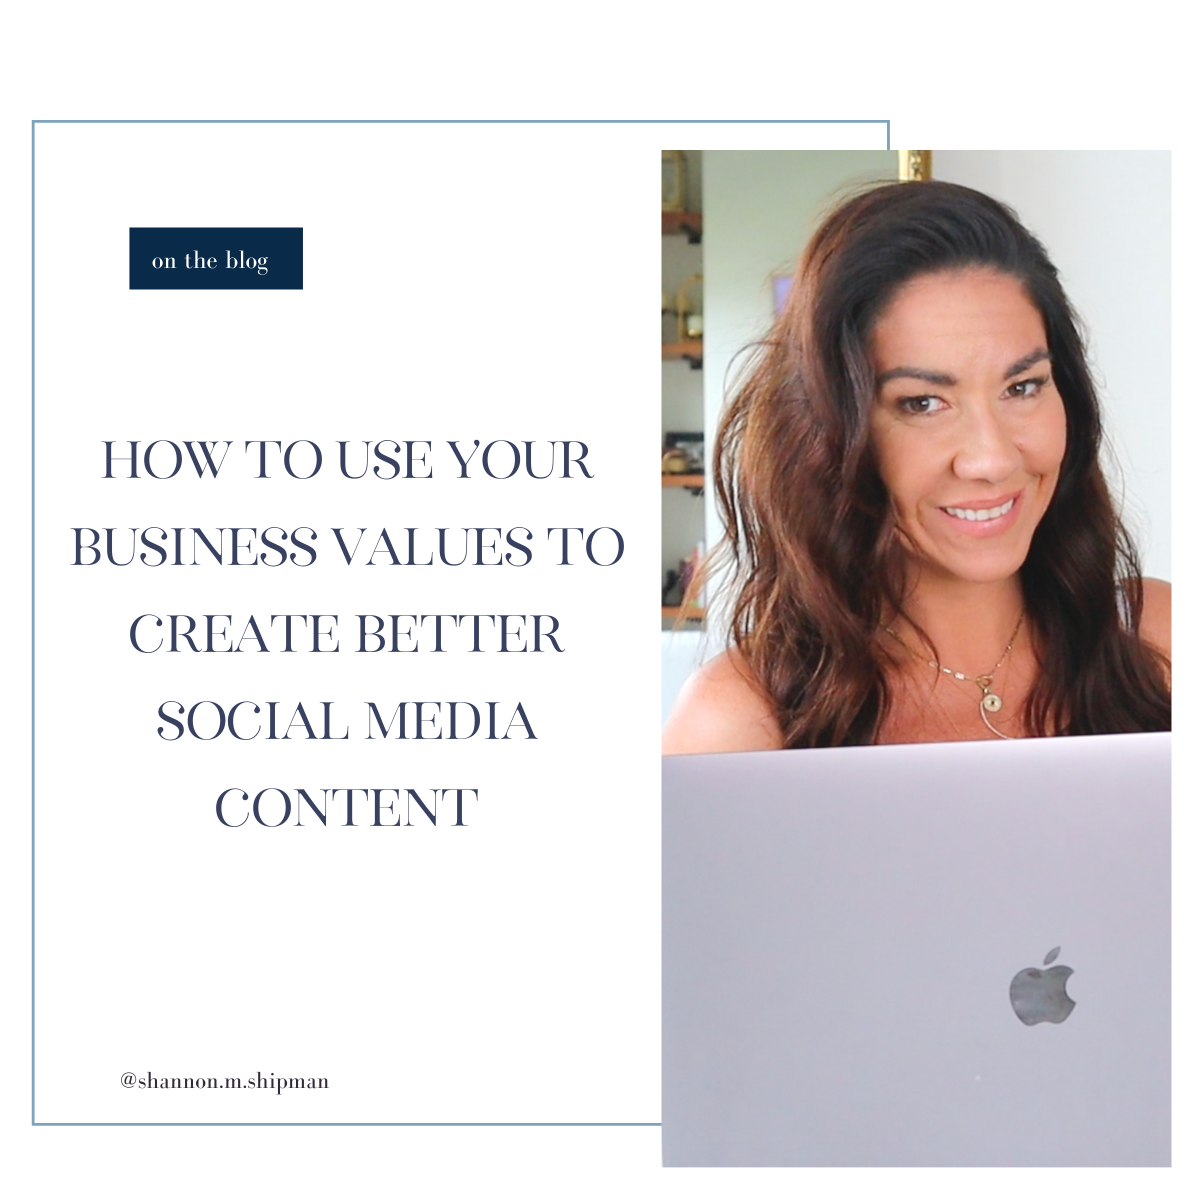 How to Use Your Business Values to Create Better Social Media Content | Business Values by popular New England lifestyle blogger Shannon Shipman: Pinterest image of how to use your business values to create better content. 